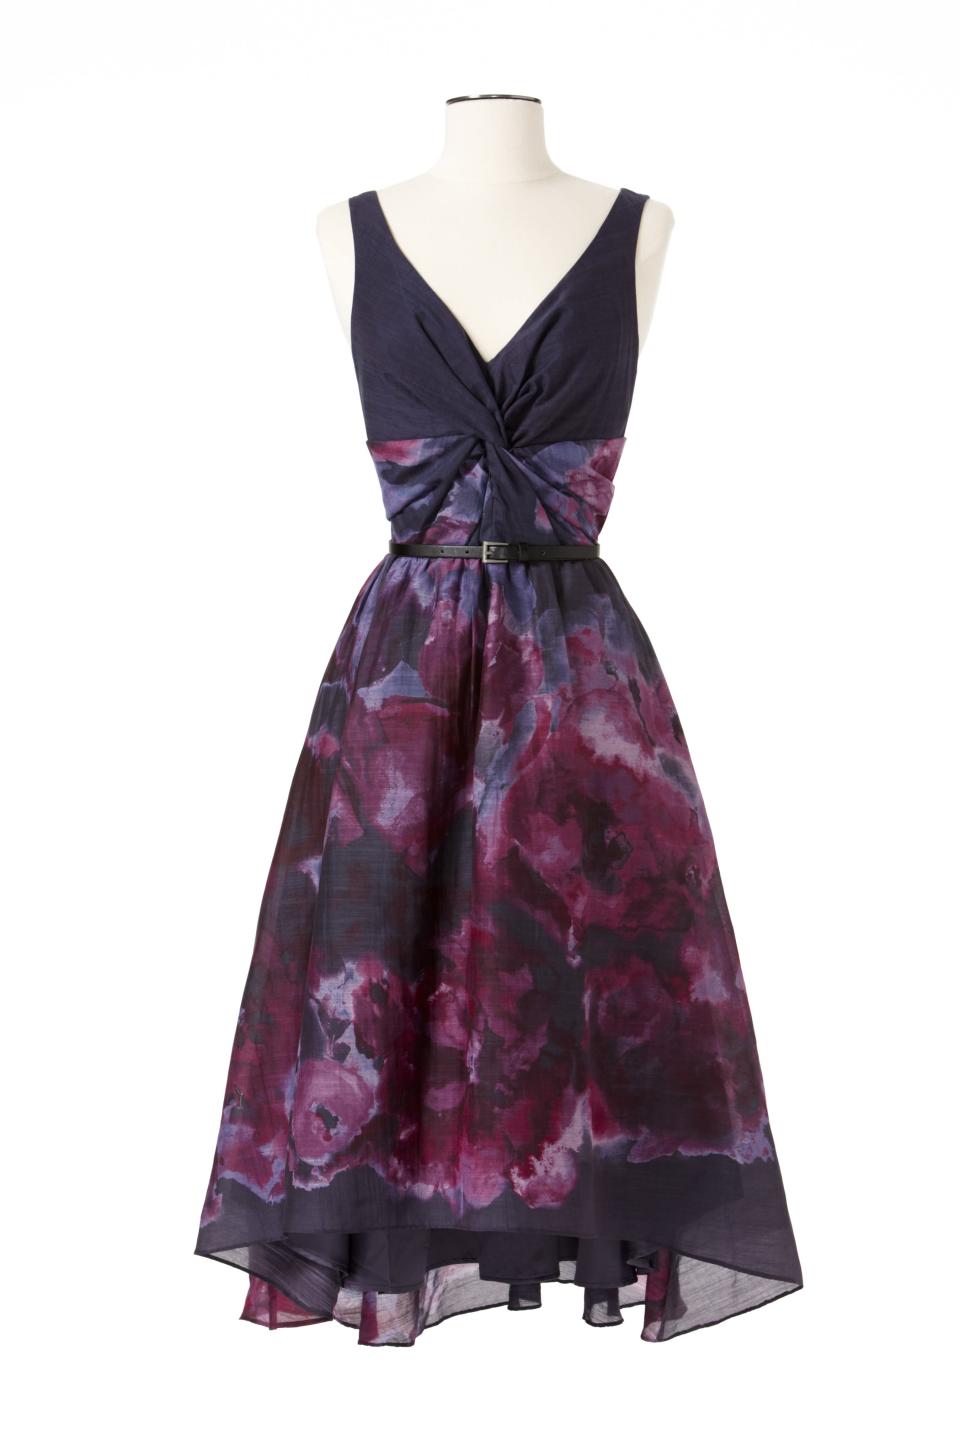 <b>Lela Rose for Target + Neiman Marcus Holiday Collection Dress</b><br><br> Price: $99.99<br><br> Size: 2 – 14<br><br>